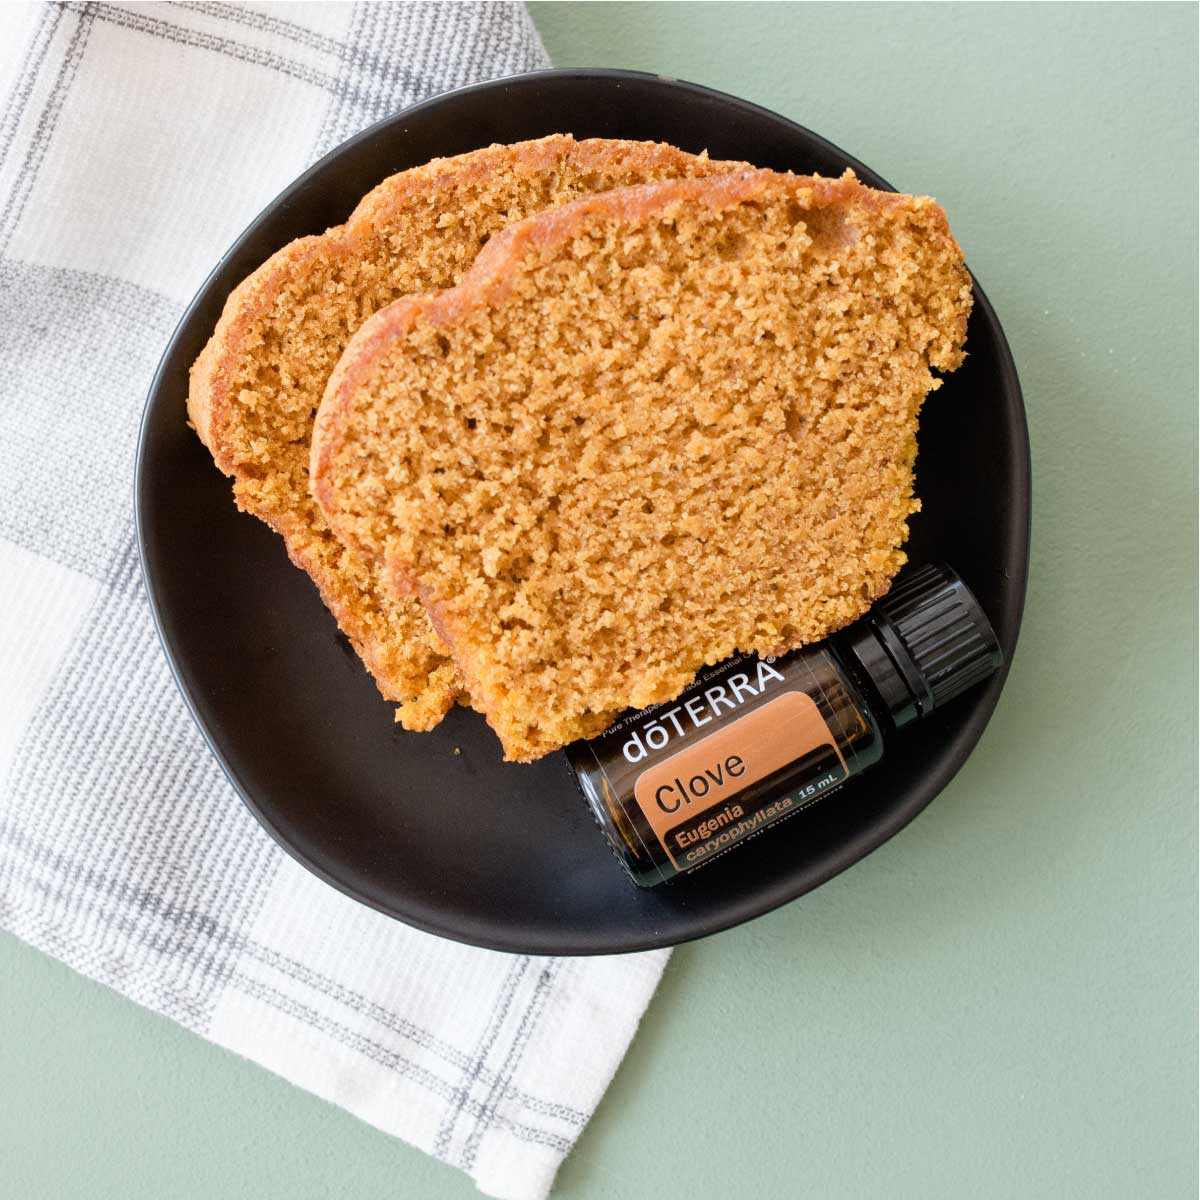 Bottle of Clove essential oil with homemade bread. Wondering how to use Clove essential oil? Clove oil can be used in oral care, adding flavor when cooking, or to create a warming massage.